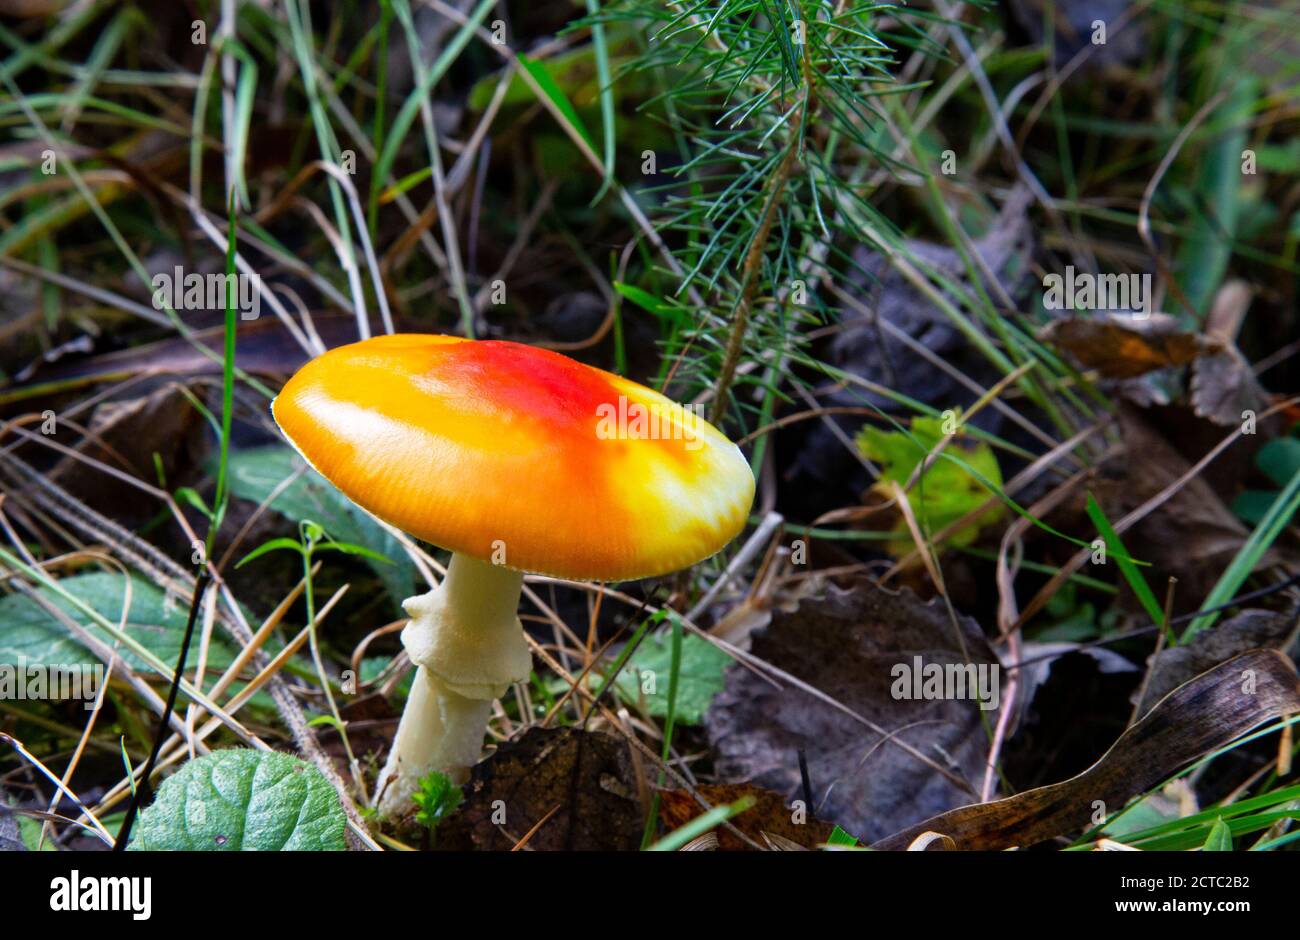 red fly agaric bright beautiful in the autumn forest Stock Photo